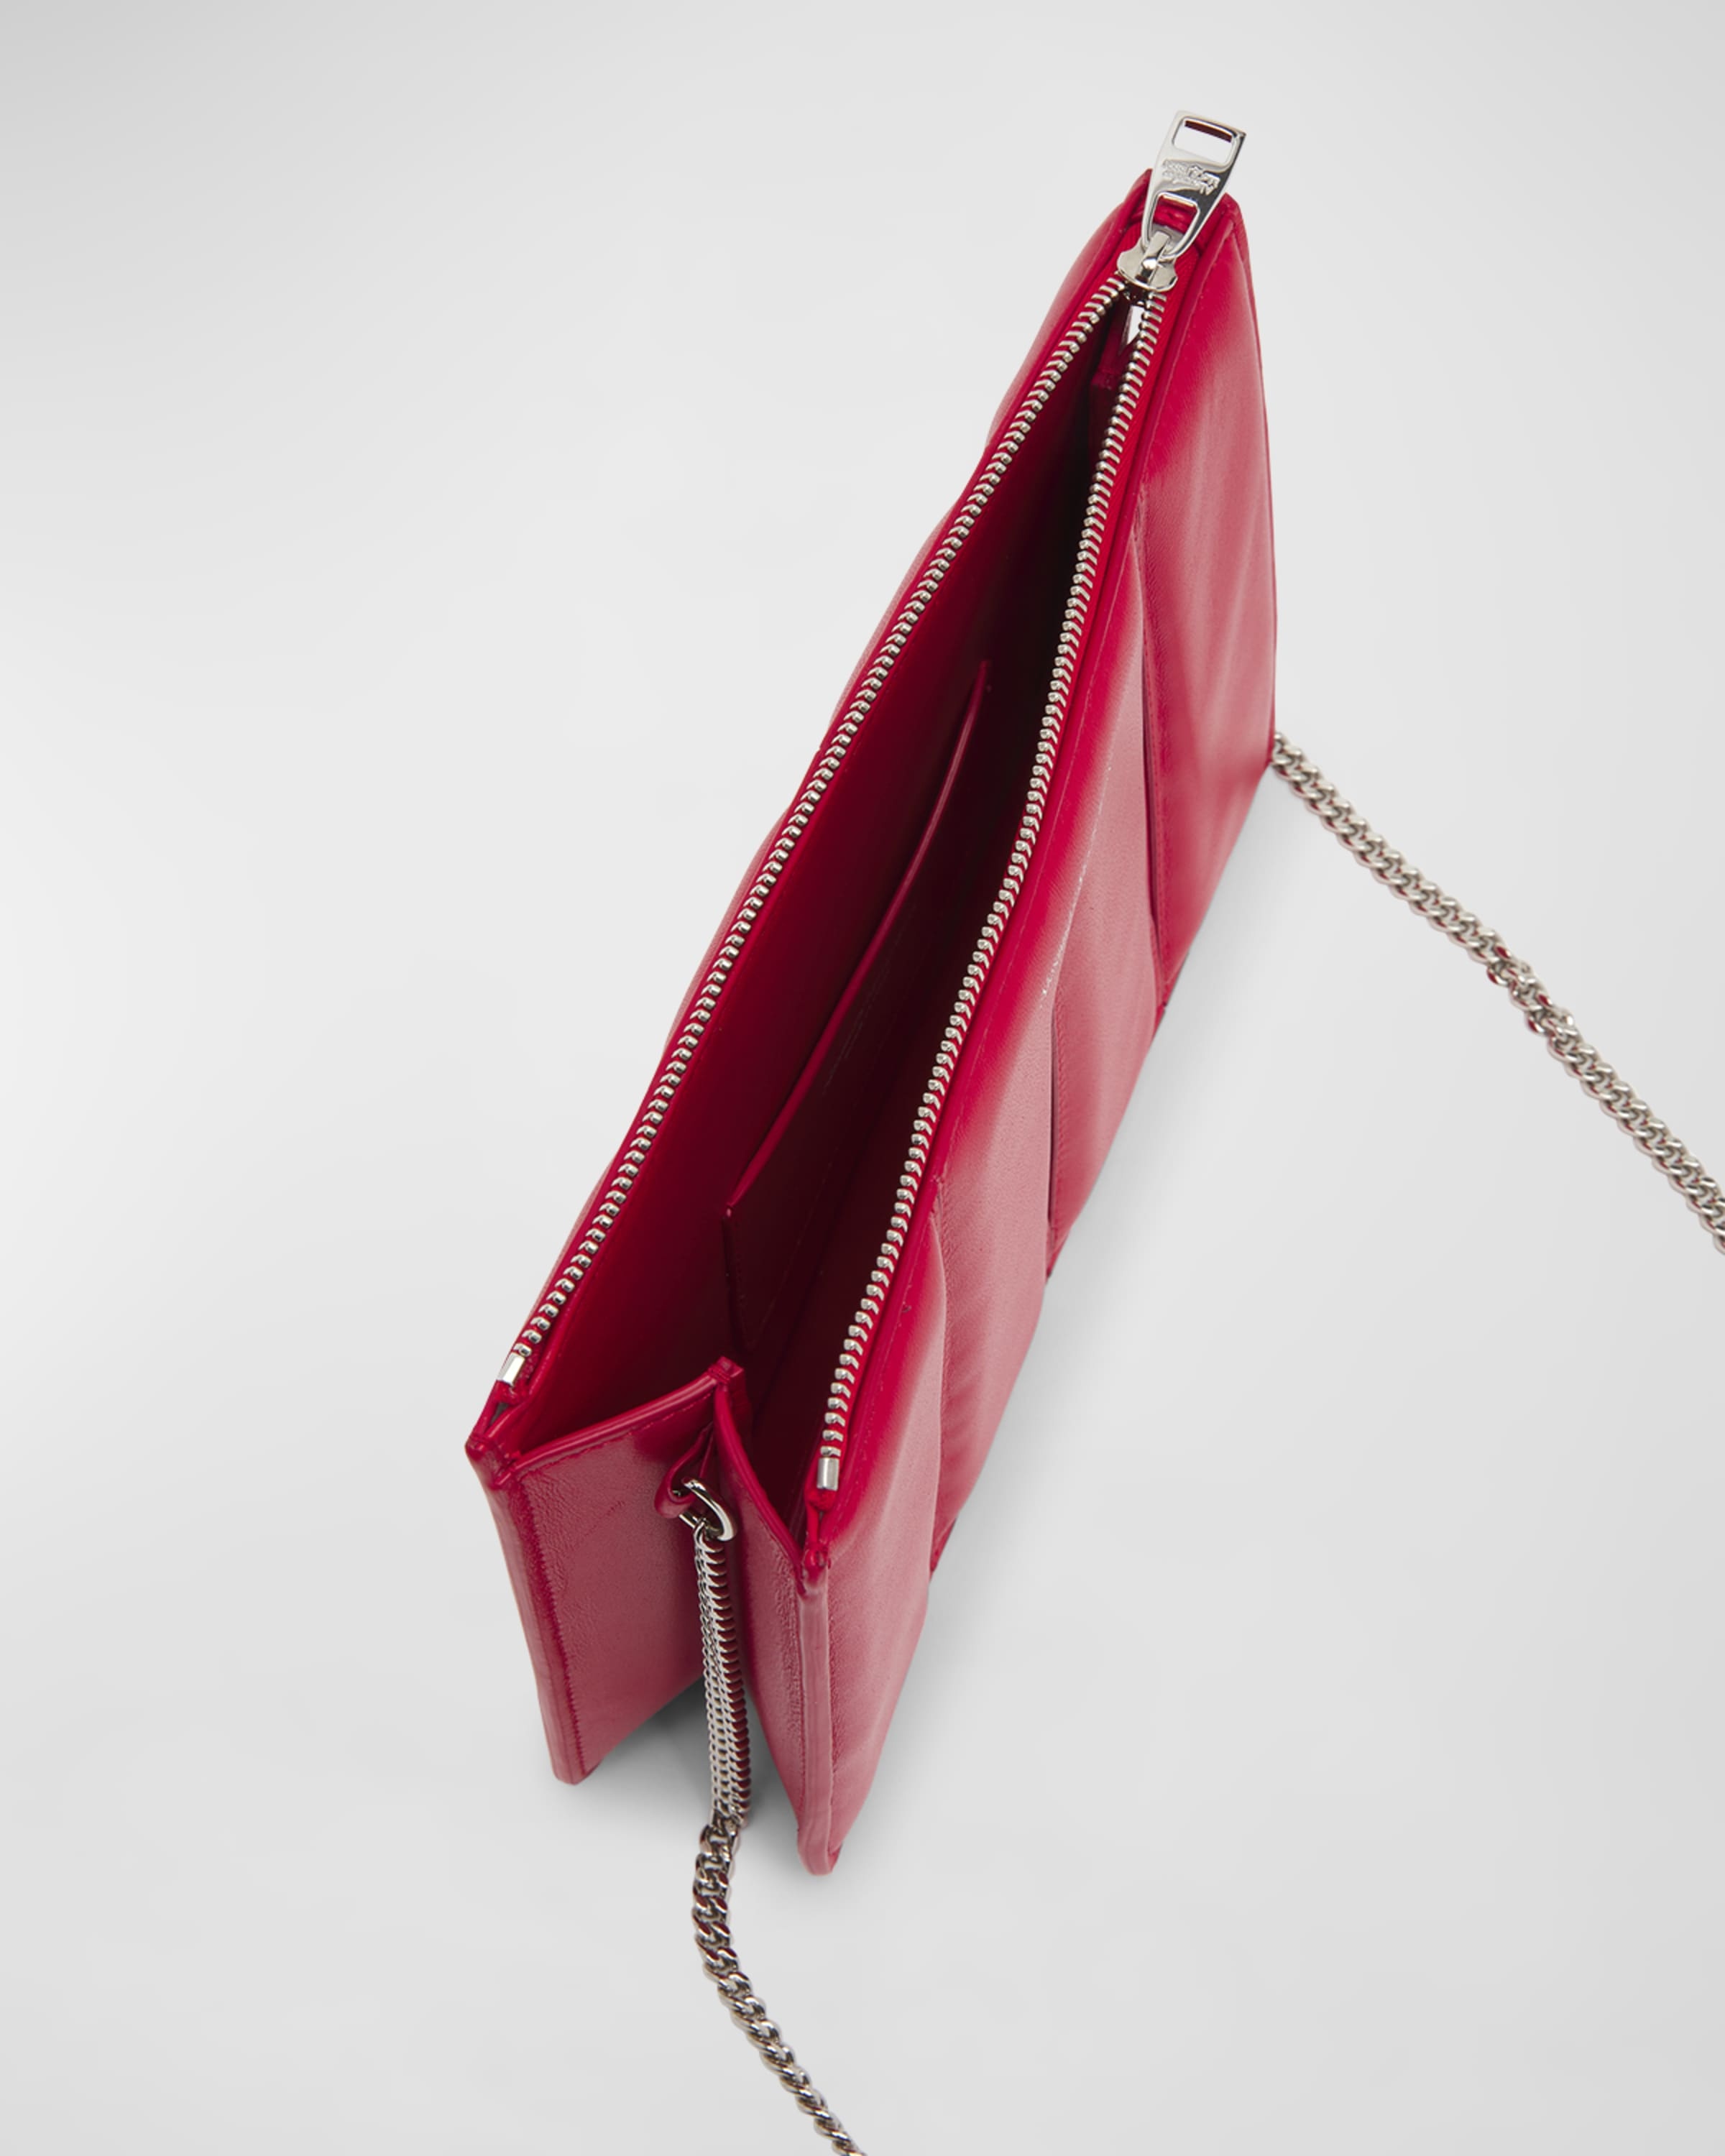 Alexander McQueen The Reverse leather clutch - Red